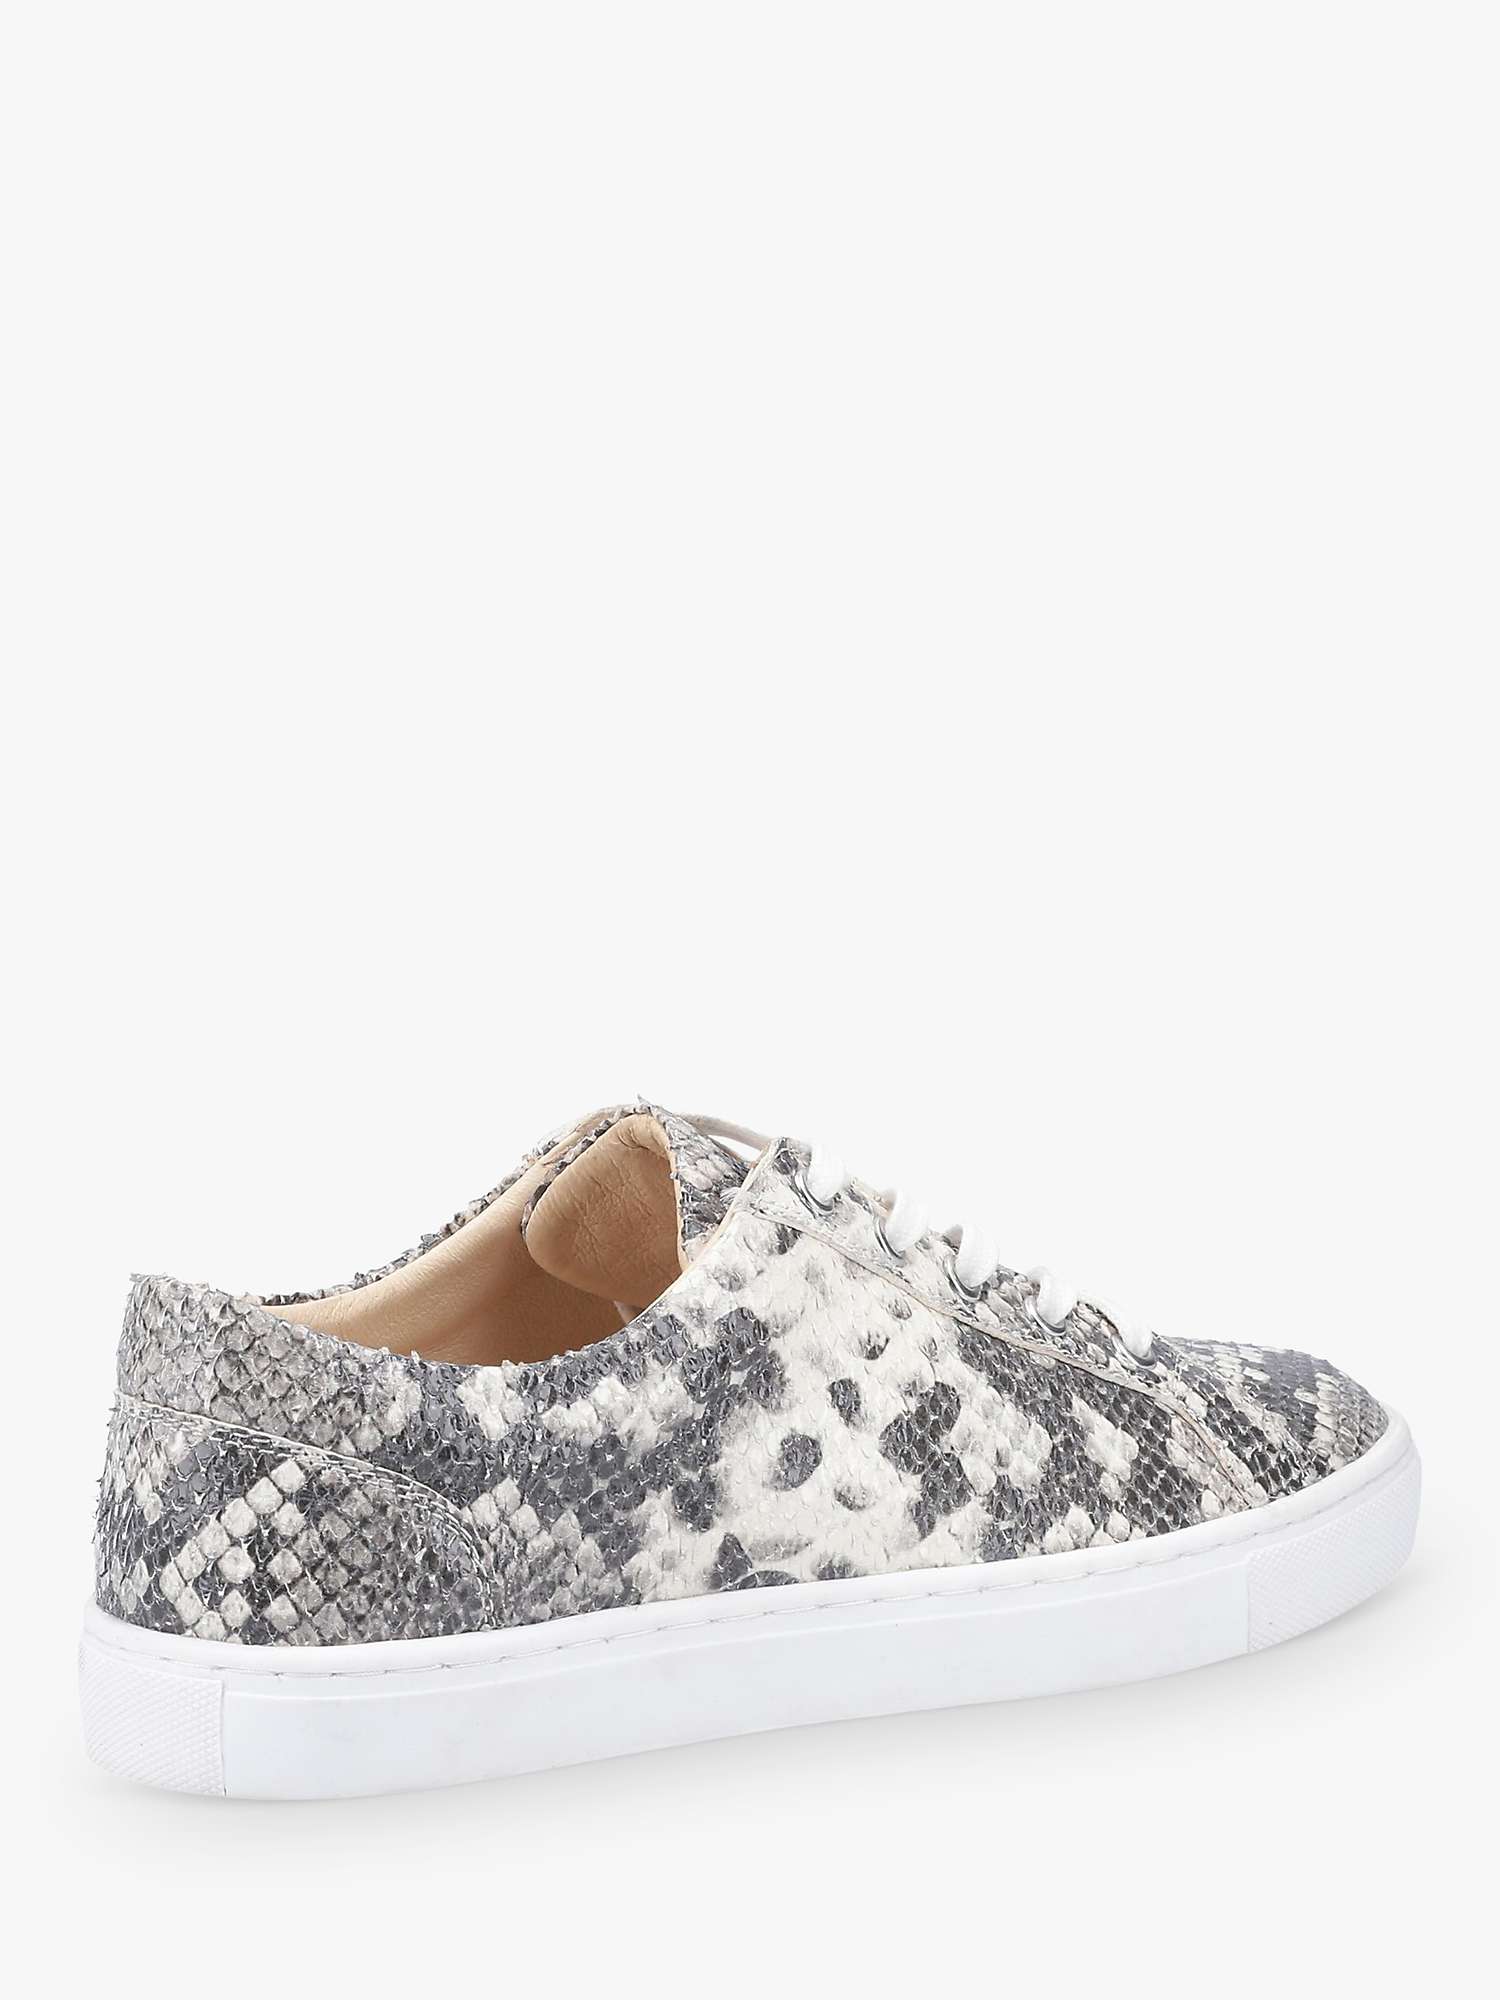 Buy Hush Puppies Tessa Leather Animal Print Lace Up Trainers Online at johnlewis.com